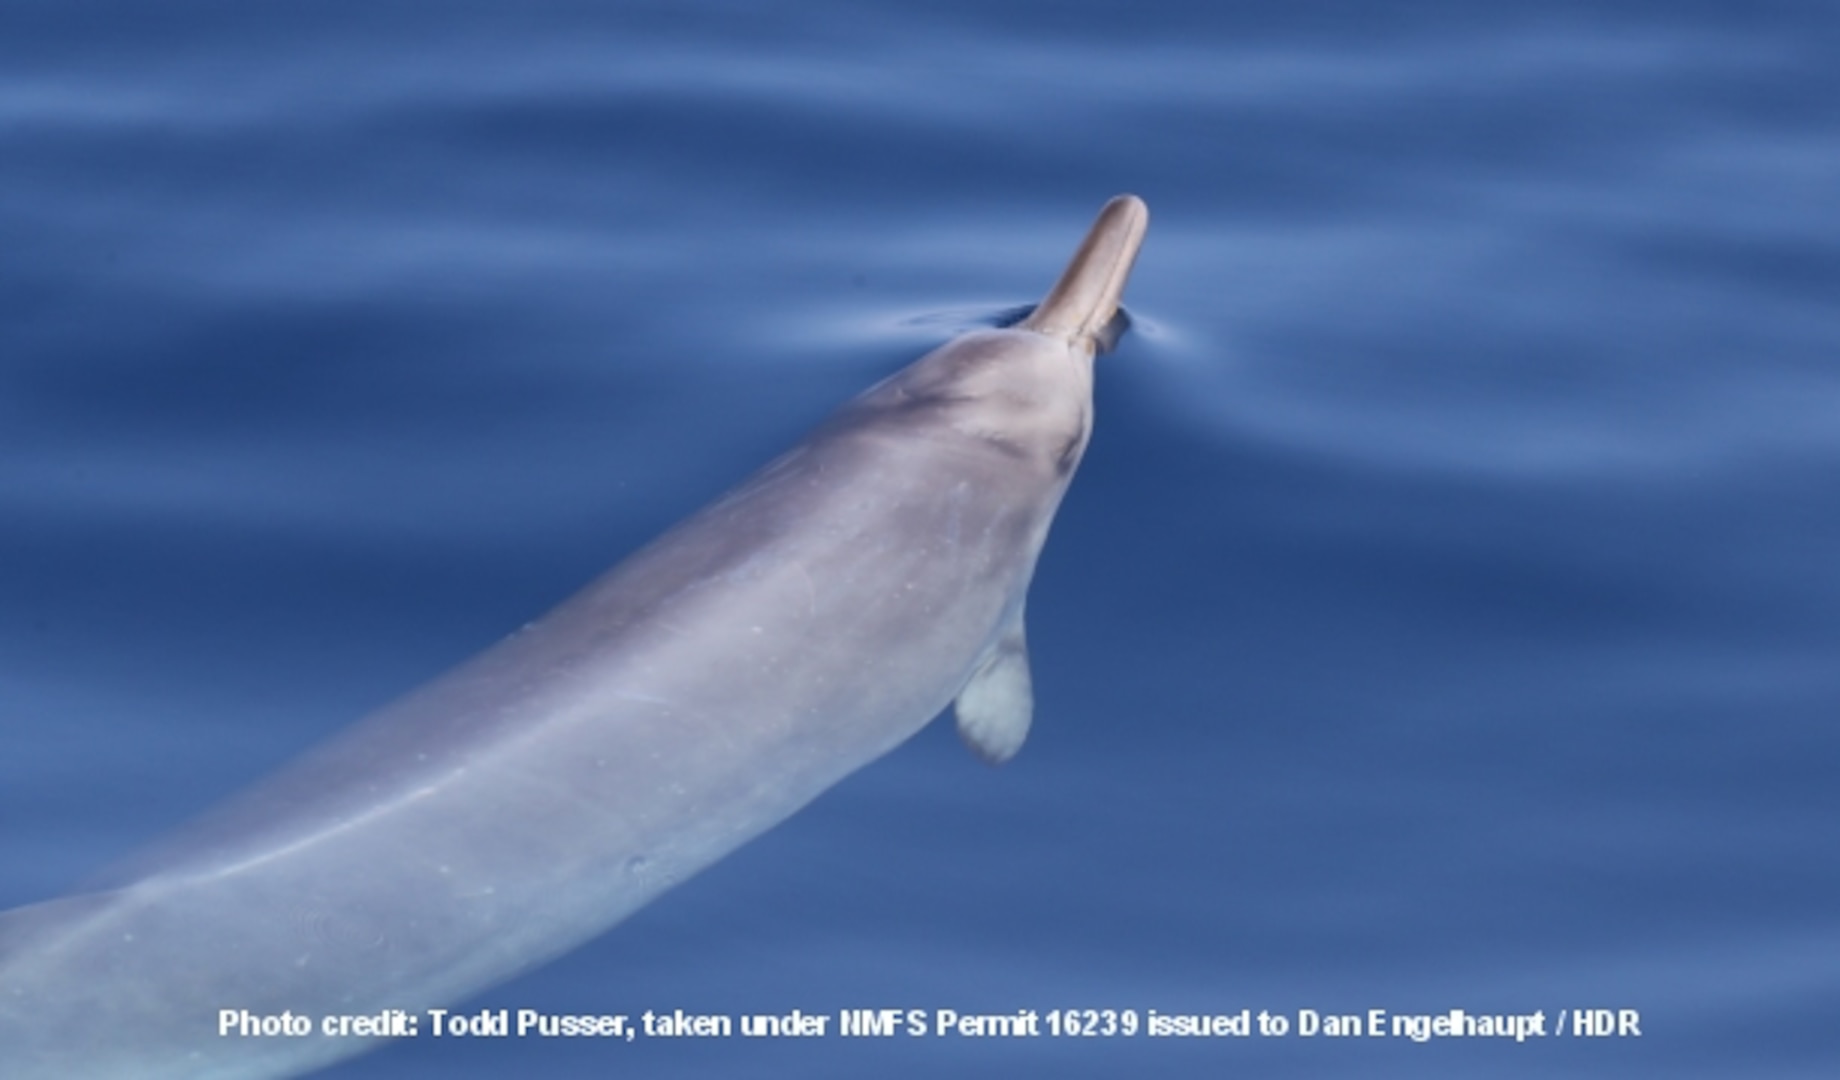 Sowerby’s beaked whales have a relatively bulbous melon, a long rostrum, and a pair of small teeth that erupt above the gumline near the middle of the lower jaw in adult males only. The group encountered consisted of two probable adult females and a juvenile.